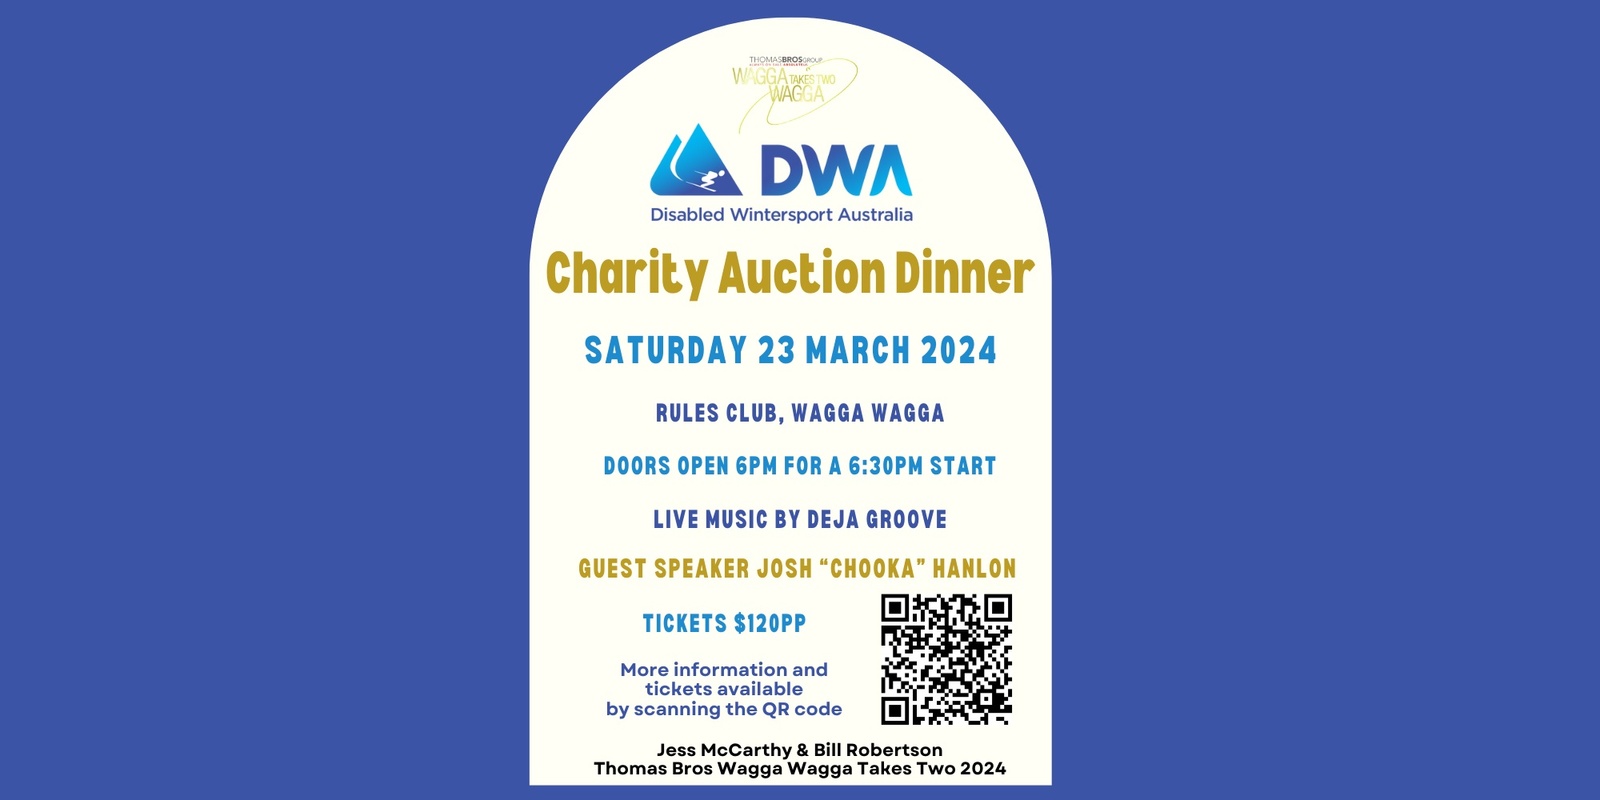 Banner image for Charity Auction Dinner - Disabled Wintersport Australia, Thomas Bros Wagga Wagga Takes Two 2024